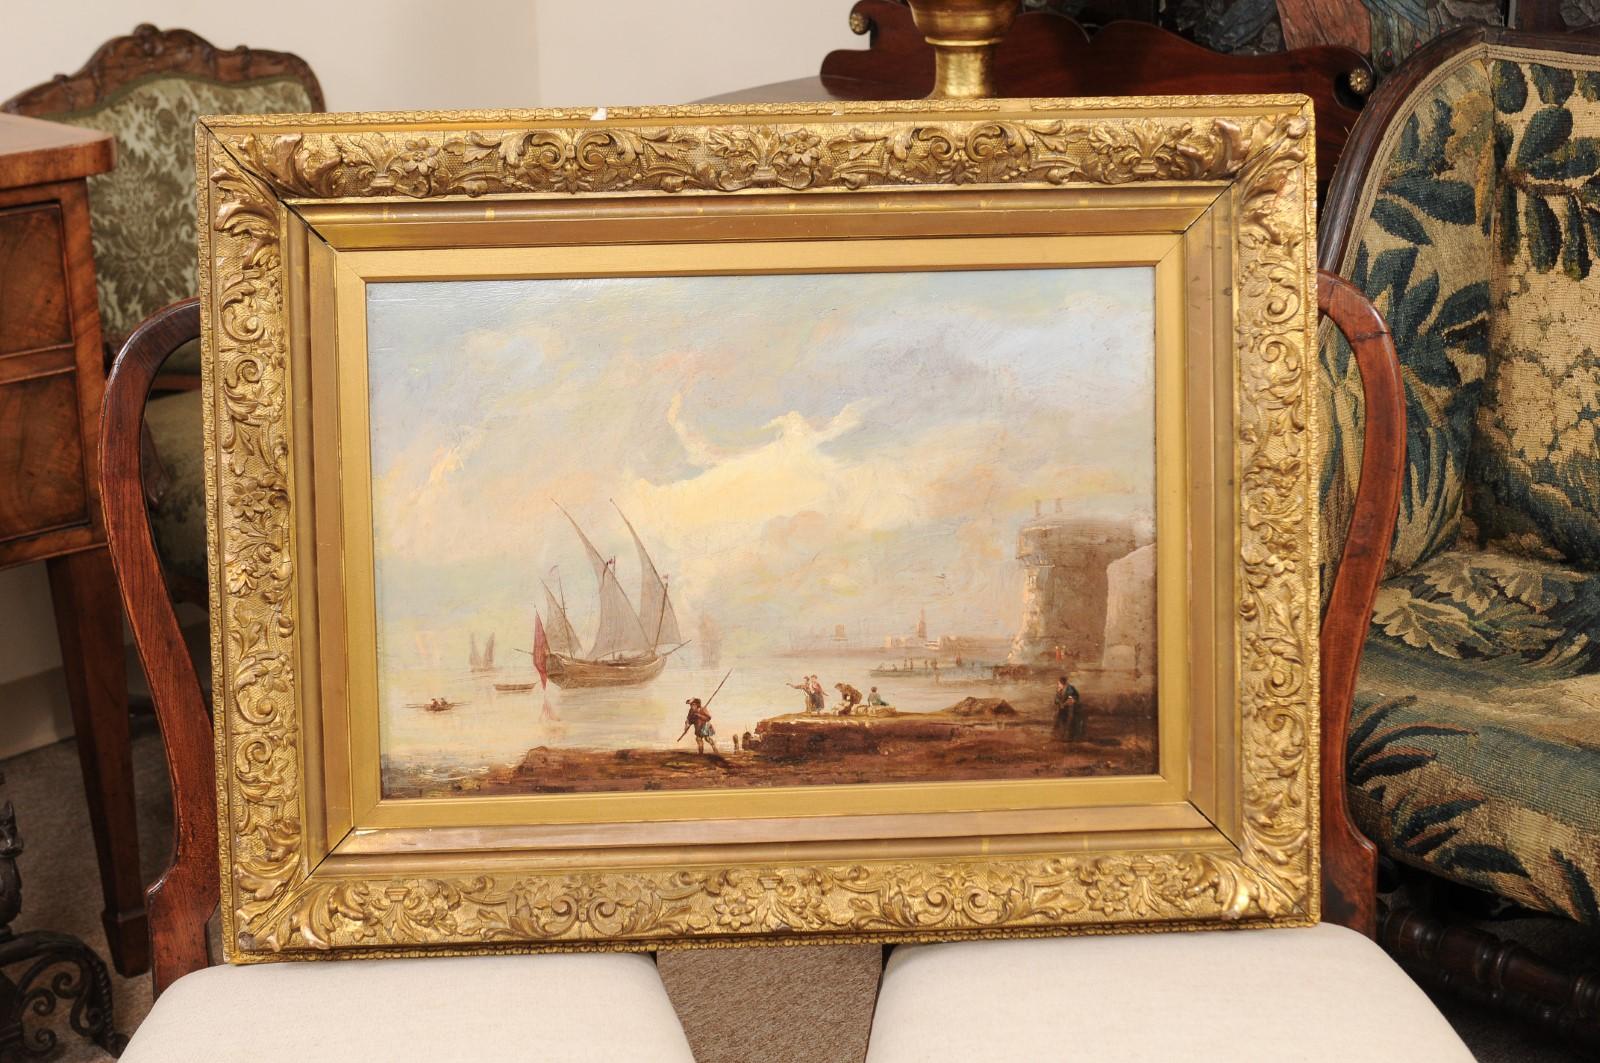 The 19th century continental oil on canvas painting of harbor with sailboats in carved giltwood frame.